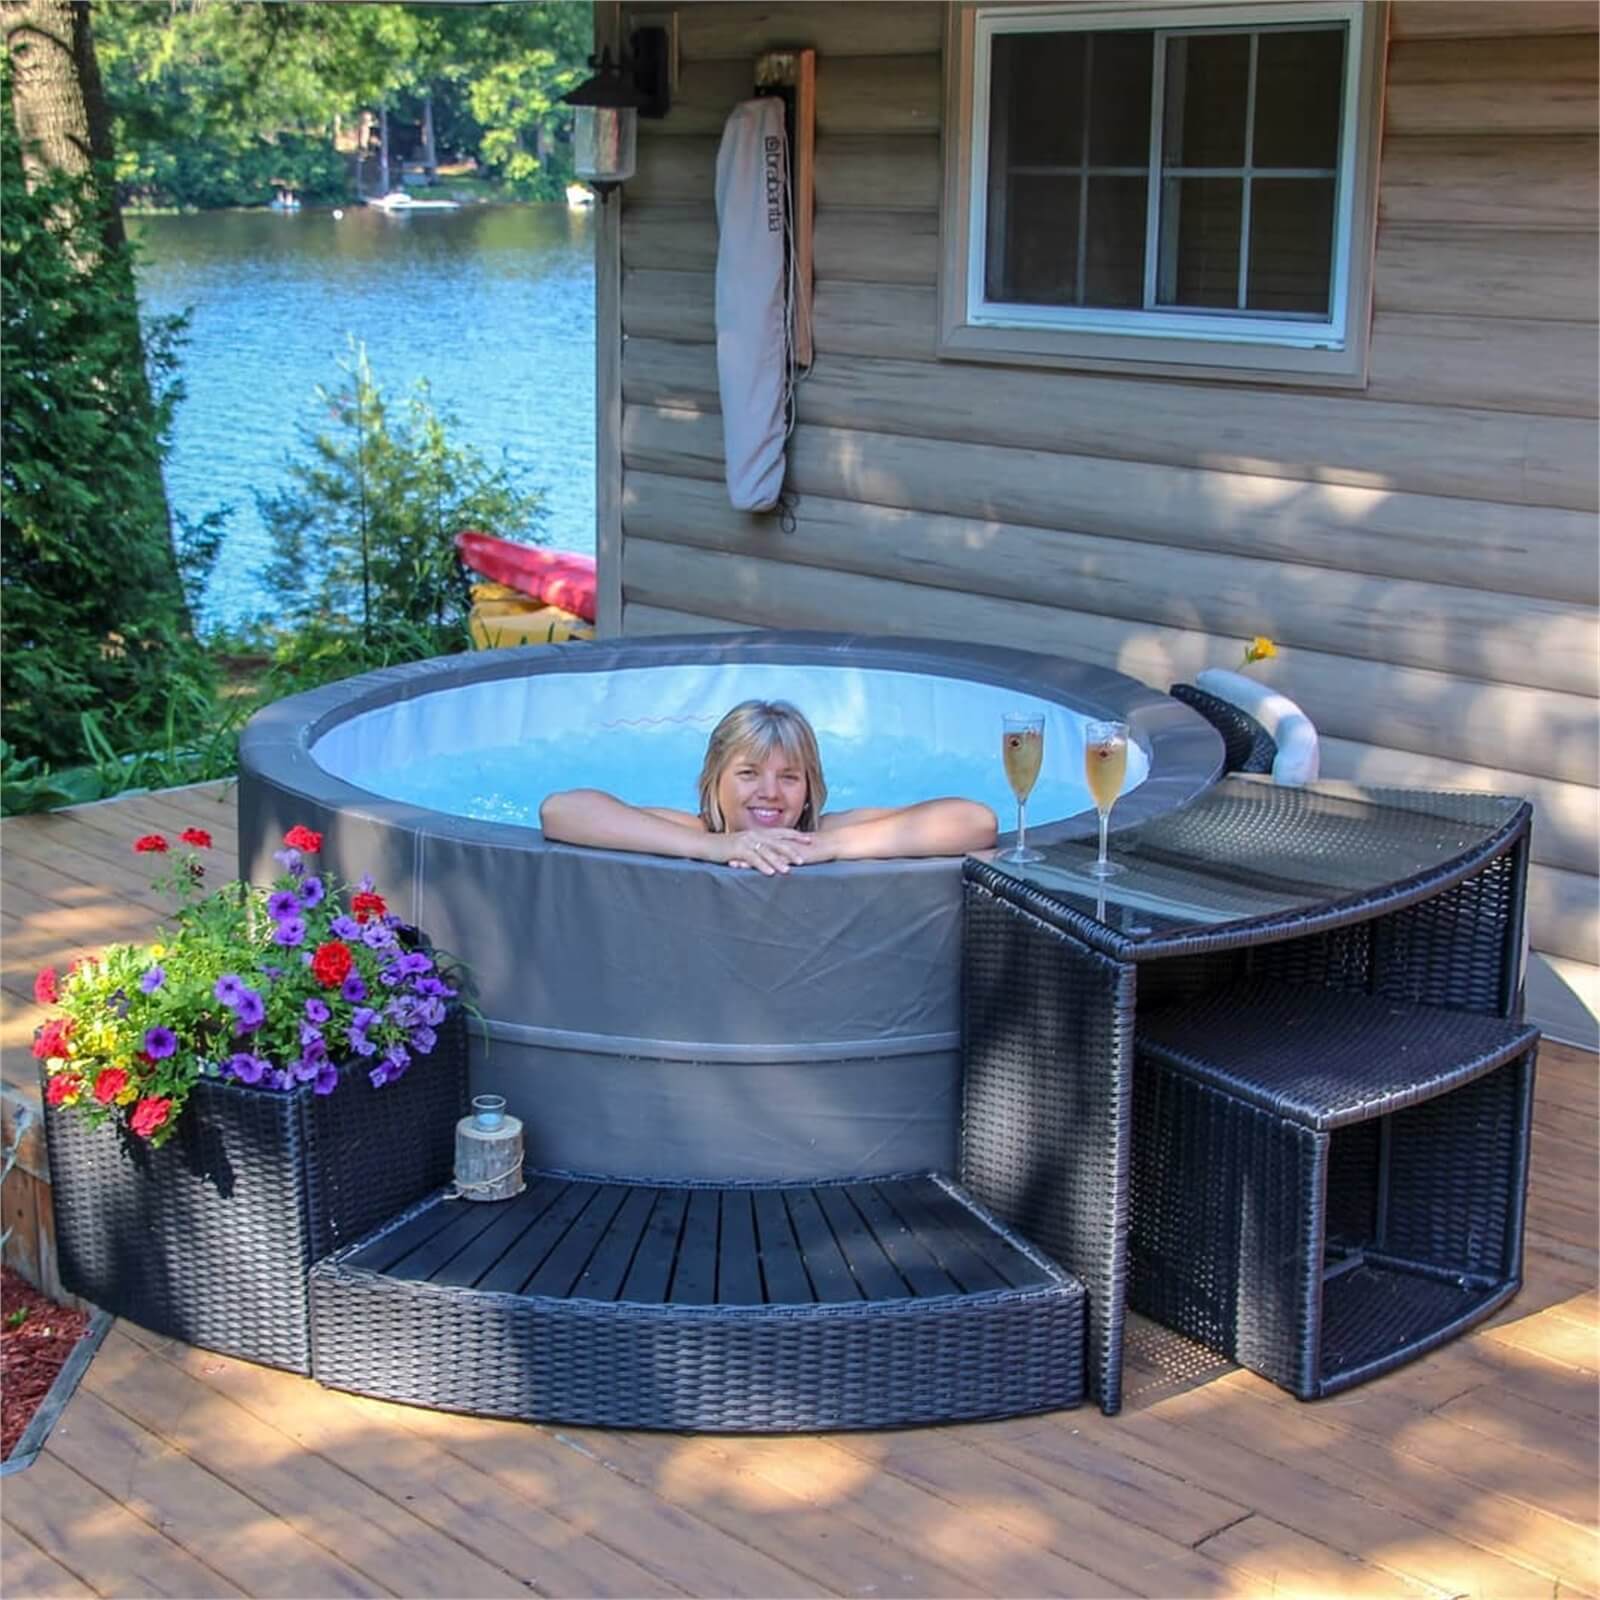 Canadian Spa Swift Current 2 - Hot Tub Pack (Includes Free Delivery)